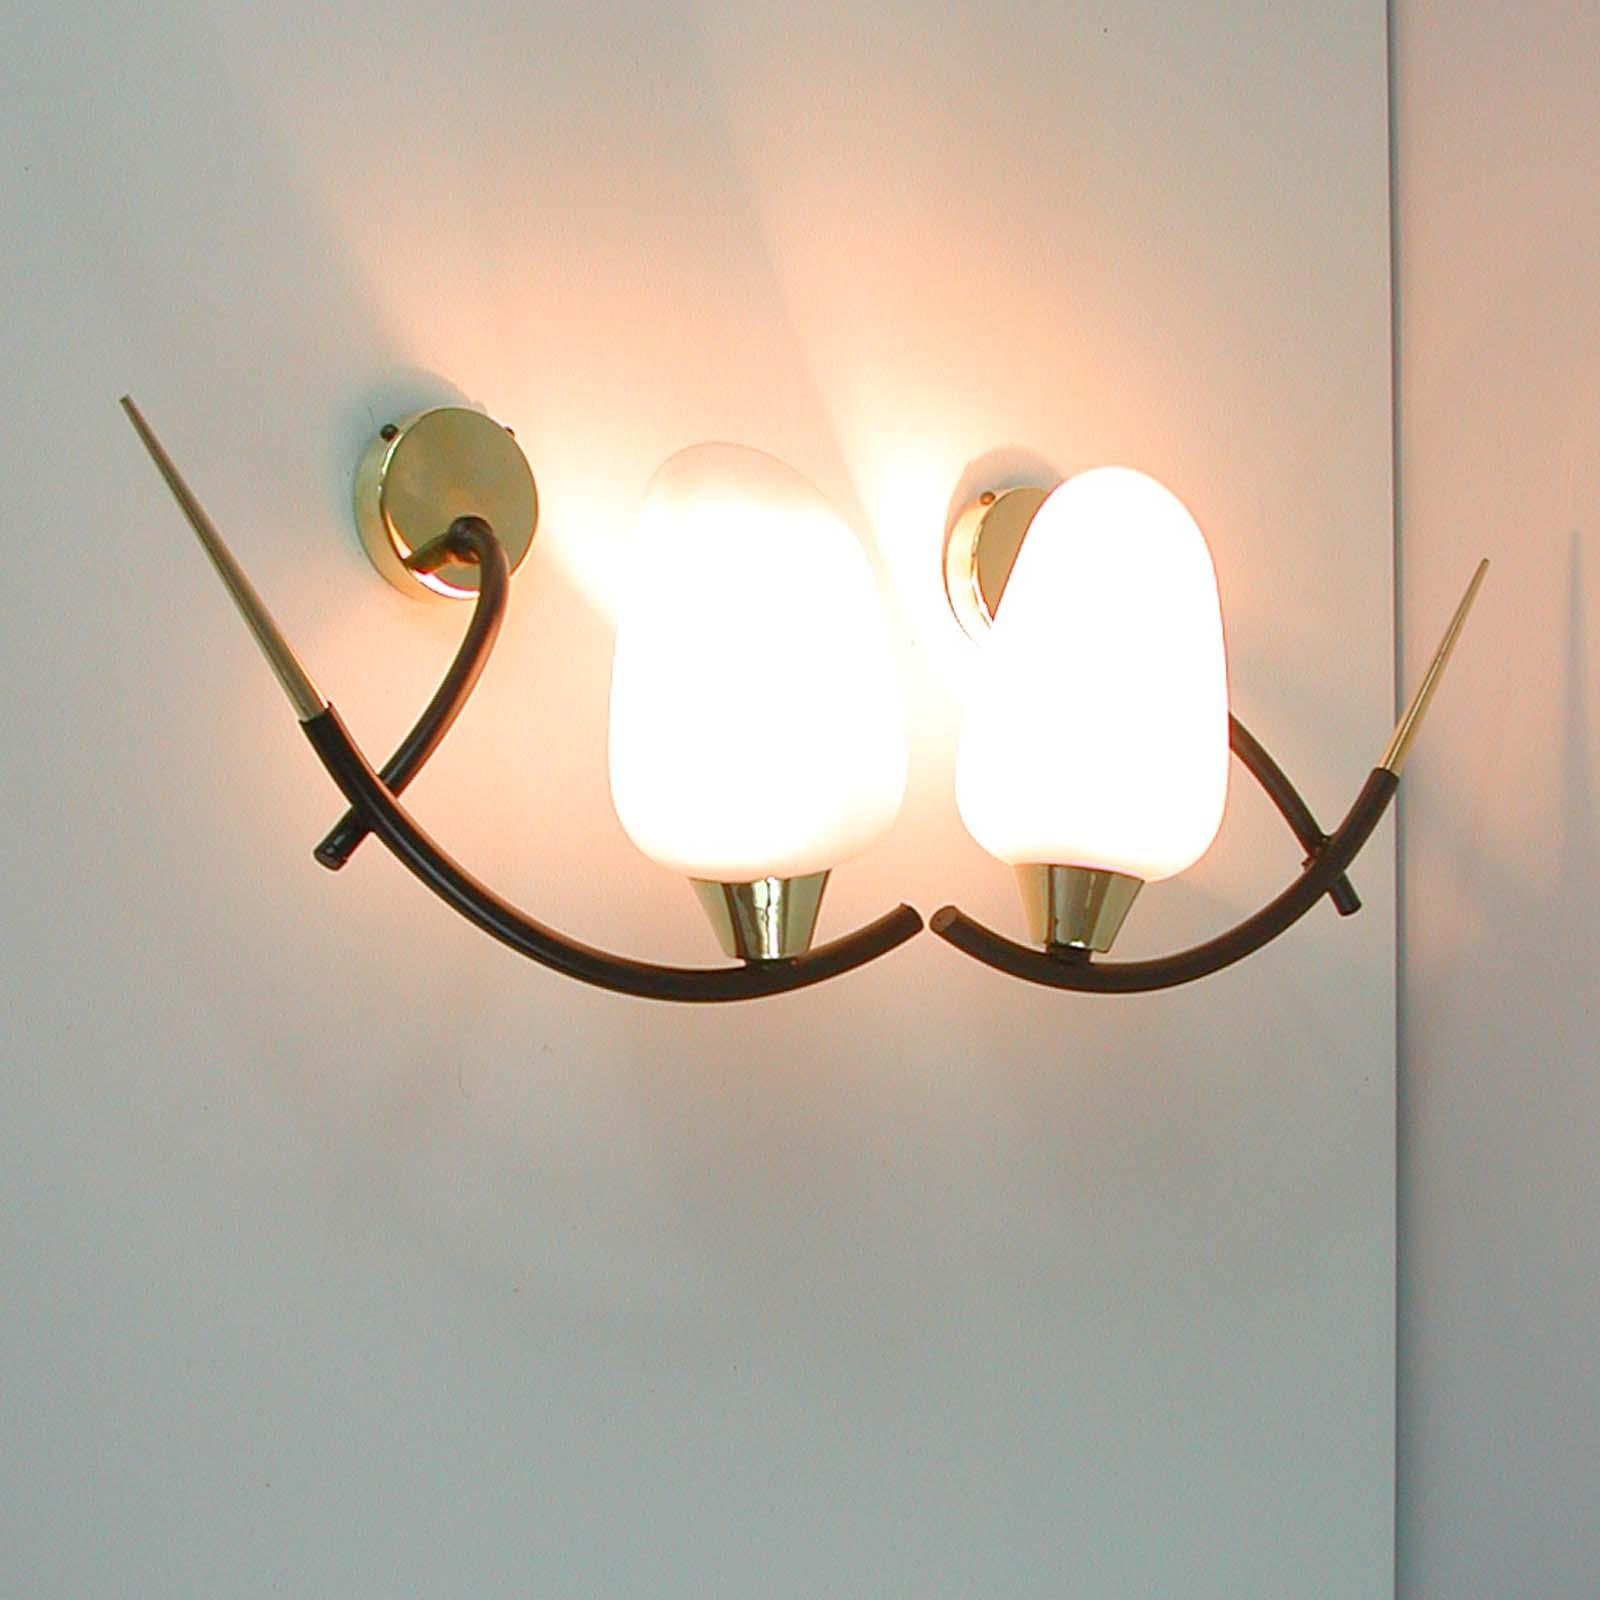 Midcentury French Brass & Opaline Glass Sconces by Maison Arlus, 1950s For Sale 6